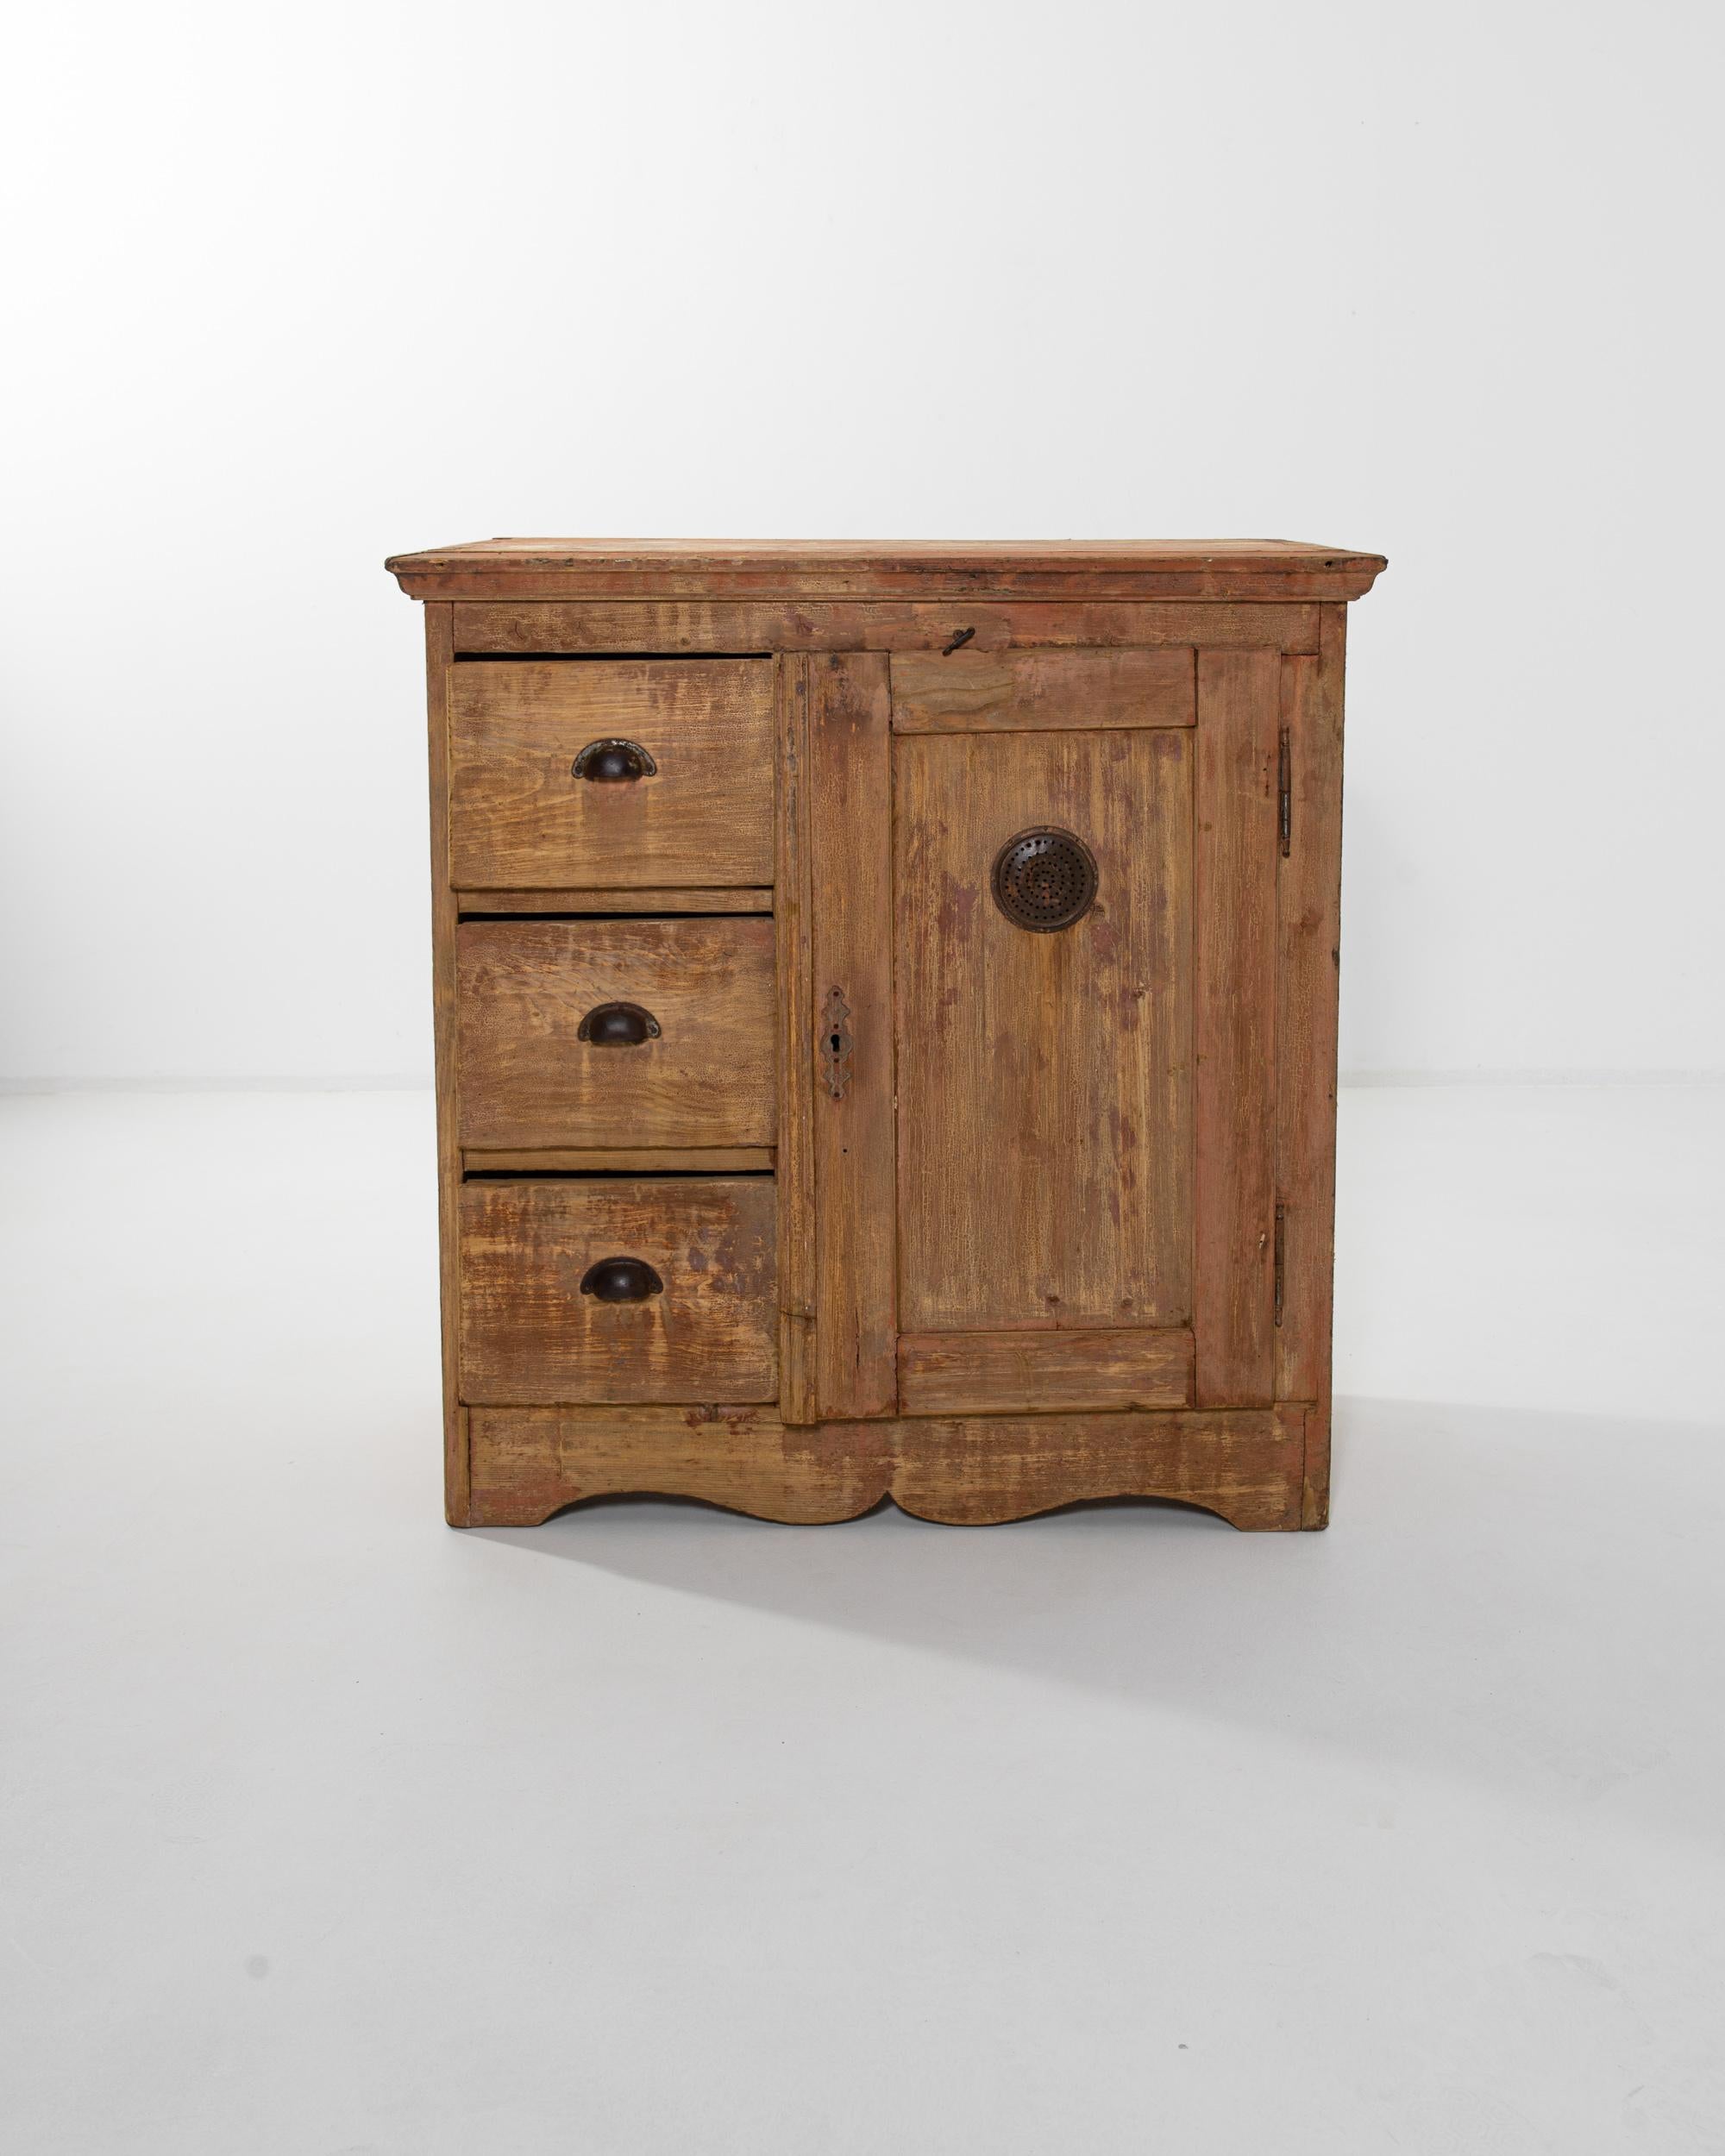 An antique wooden buffet with a country charm. Built in Central Europe in the 19th century, a perforated metal disk set in the cupboard door indicates that this piece would have once been used as a larder, allowing air to circulate to keep